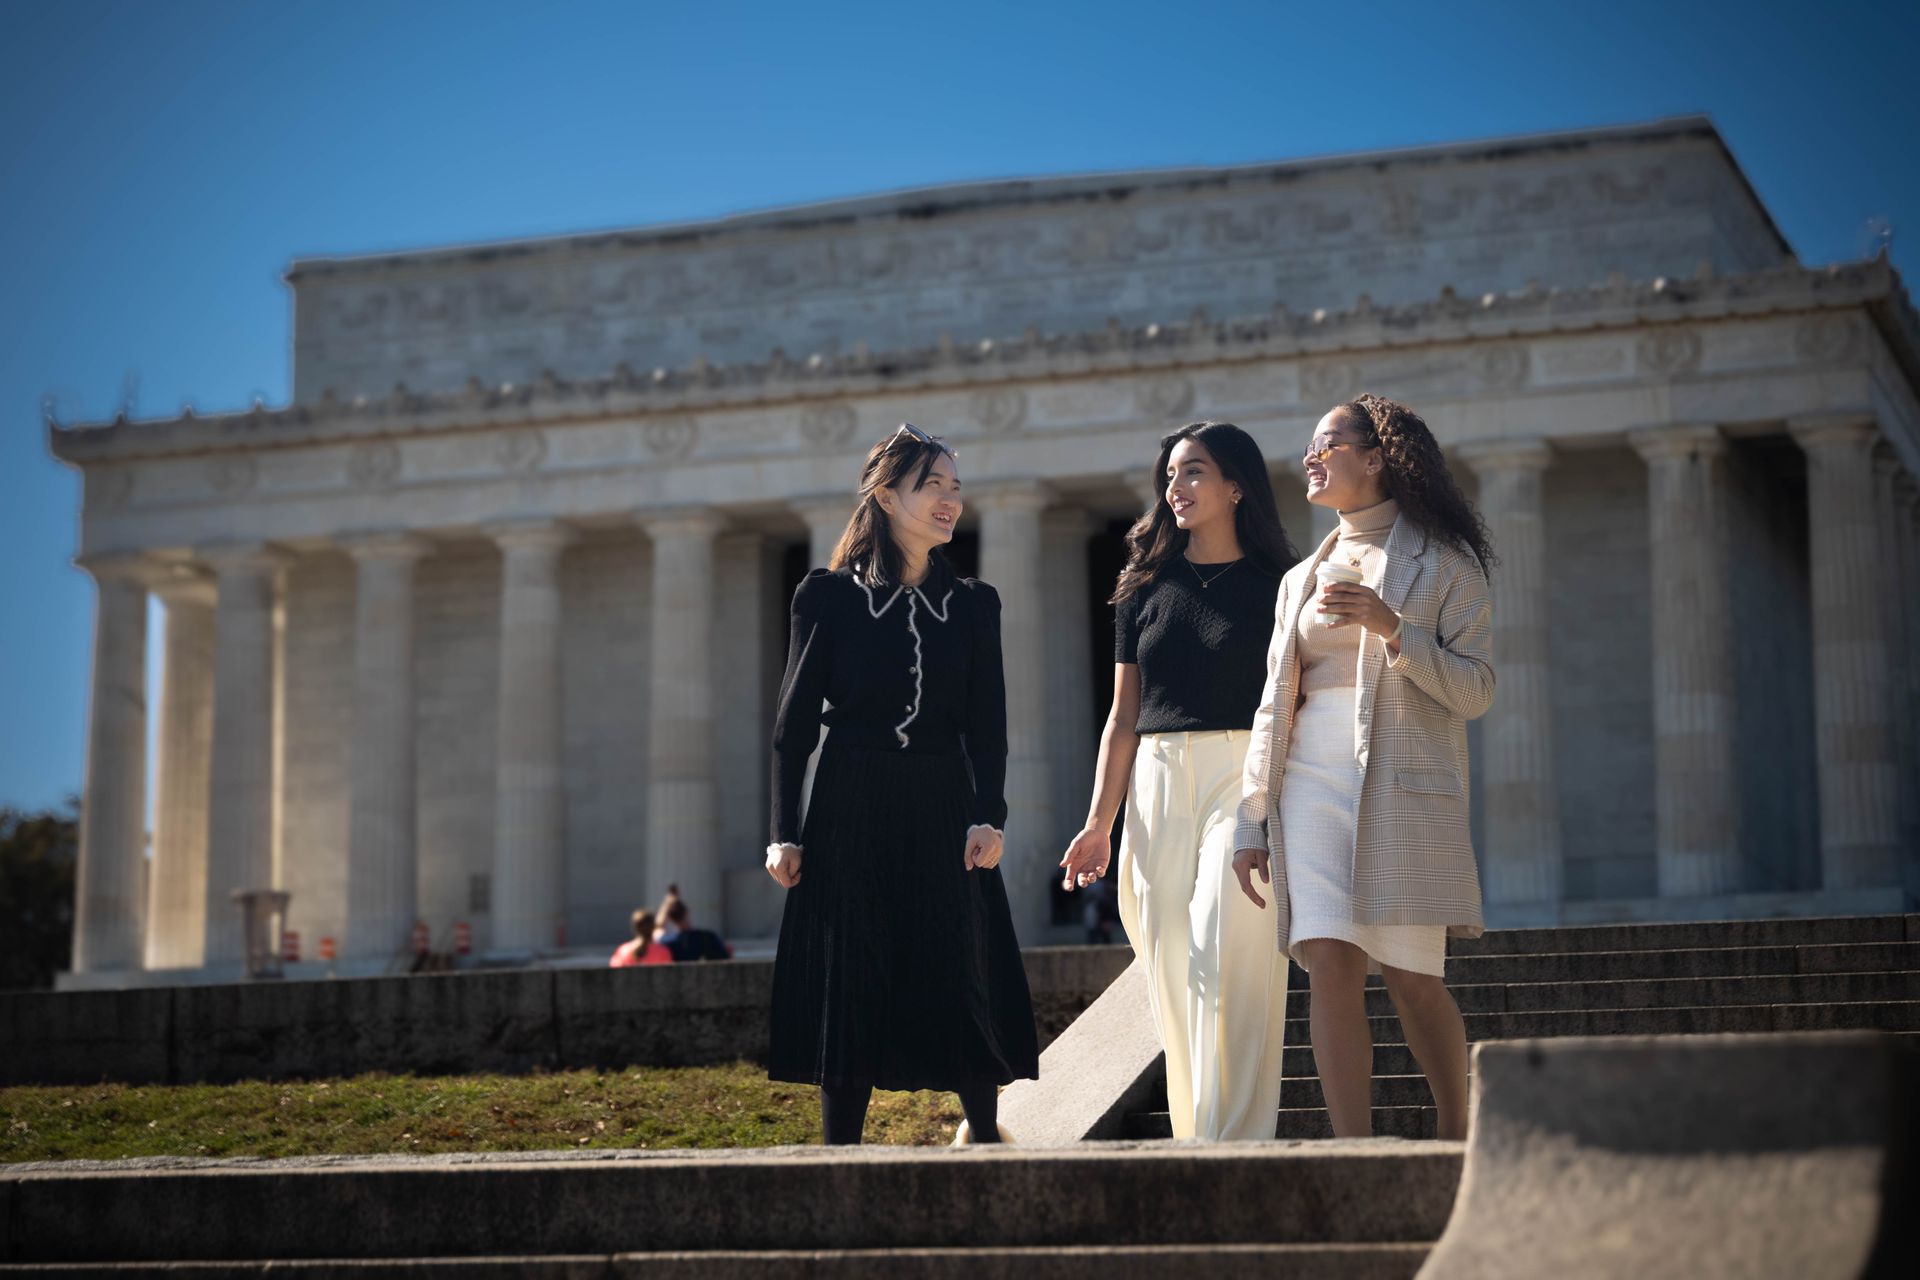 three students talking in front of the Lincoln Memorial